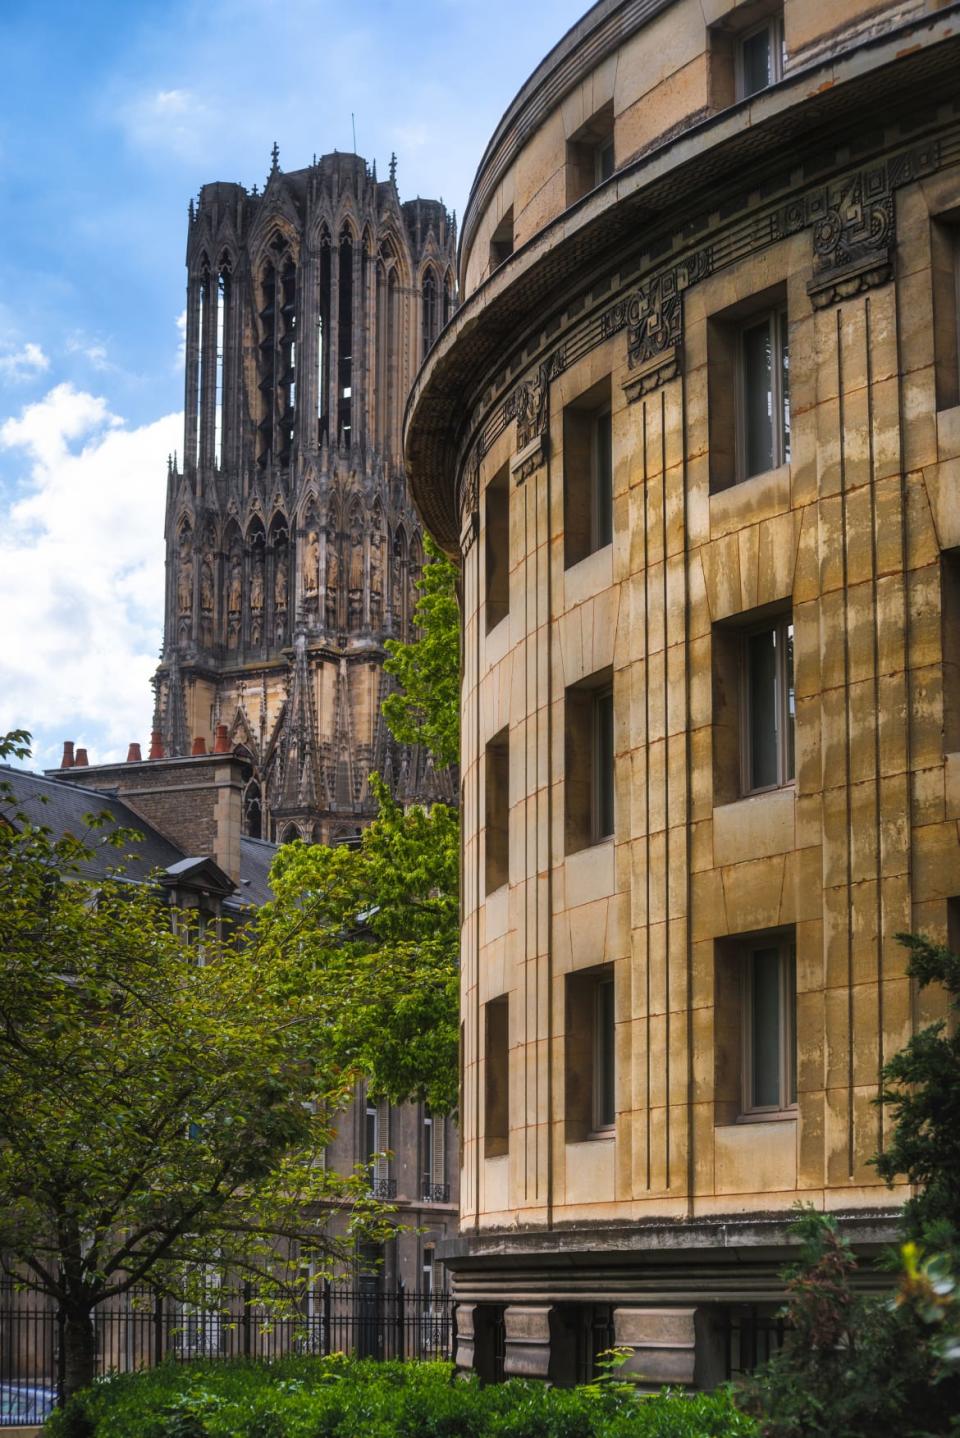 <div class="inline-image__title">1419851081</div> <div class="inline-image__caption"><p>Public Carnegie Library garden and front tower of Reims cathedral on square Place Carnegie, summer, Reims.</p></div> <div class="inline-image__credit">Sergii Zinko/Shutterstock</div>